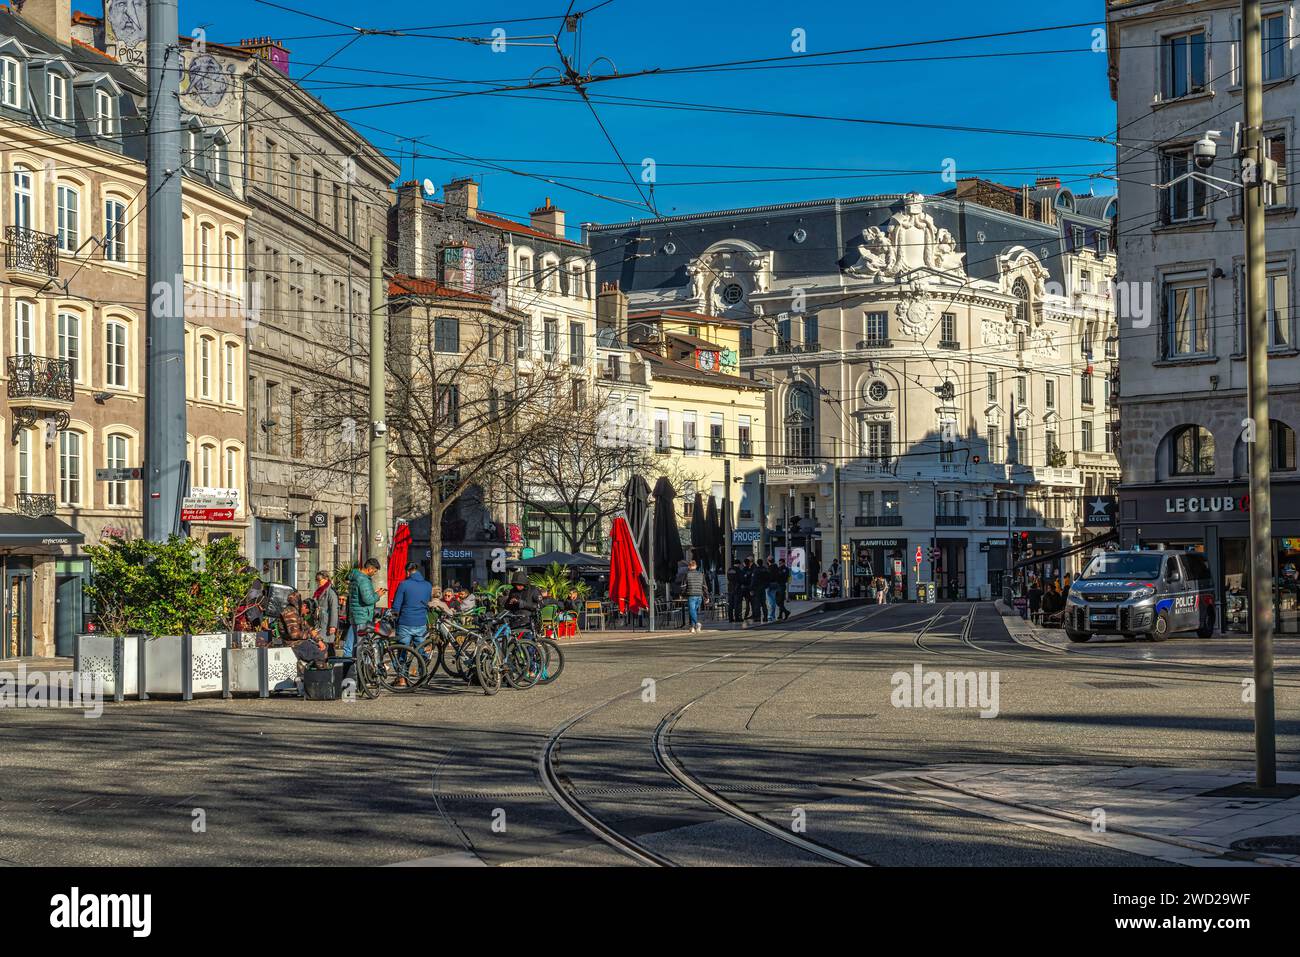 Baroque style buildings, surface metro tracks and commercial premises in Piazza del Popolo. Saint-Étienne, Auvergne-Rhône-Alpes region, France, Europe Stock Photo